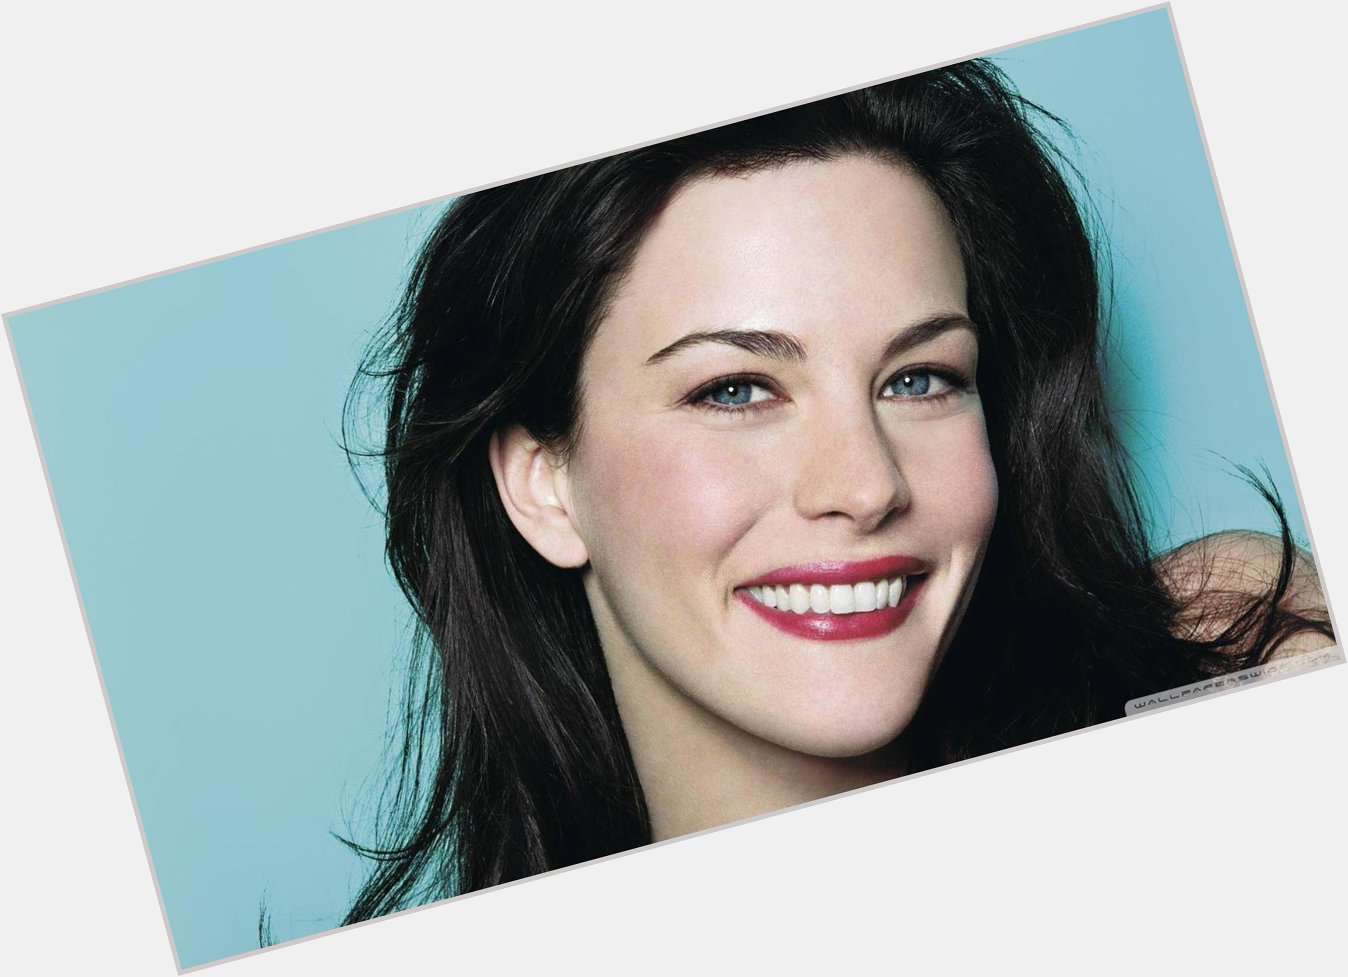 Today is the lovely Liv Tyler\s 38th birthday. Can you believe it? Happy Birthday Liv! 